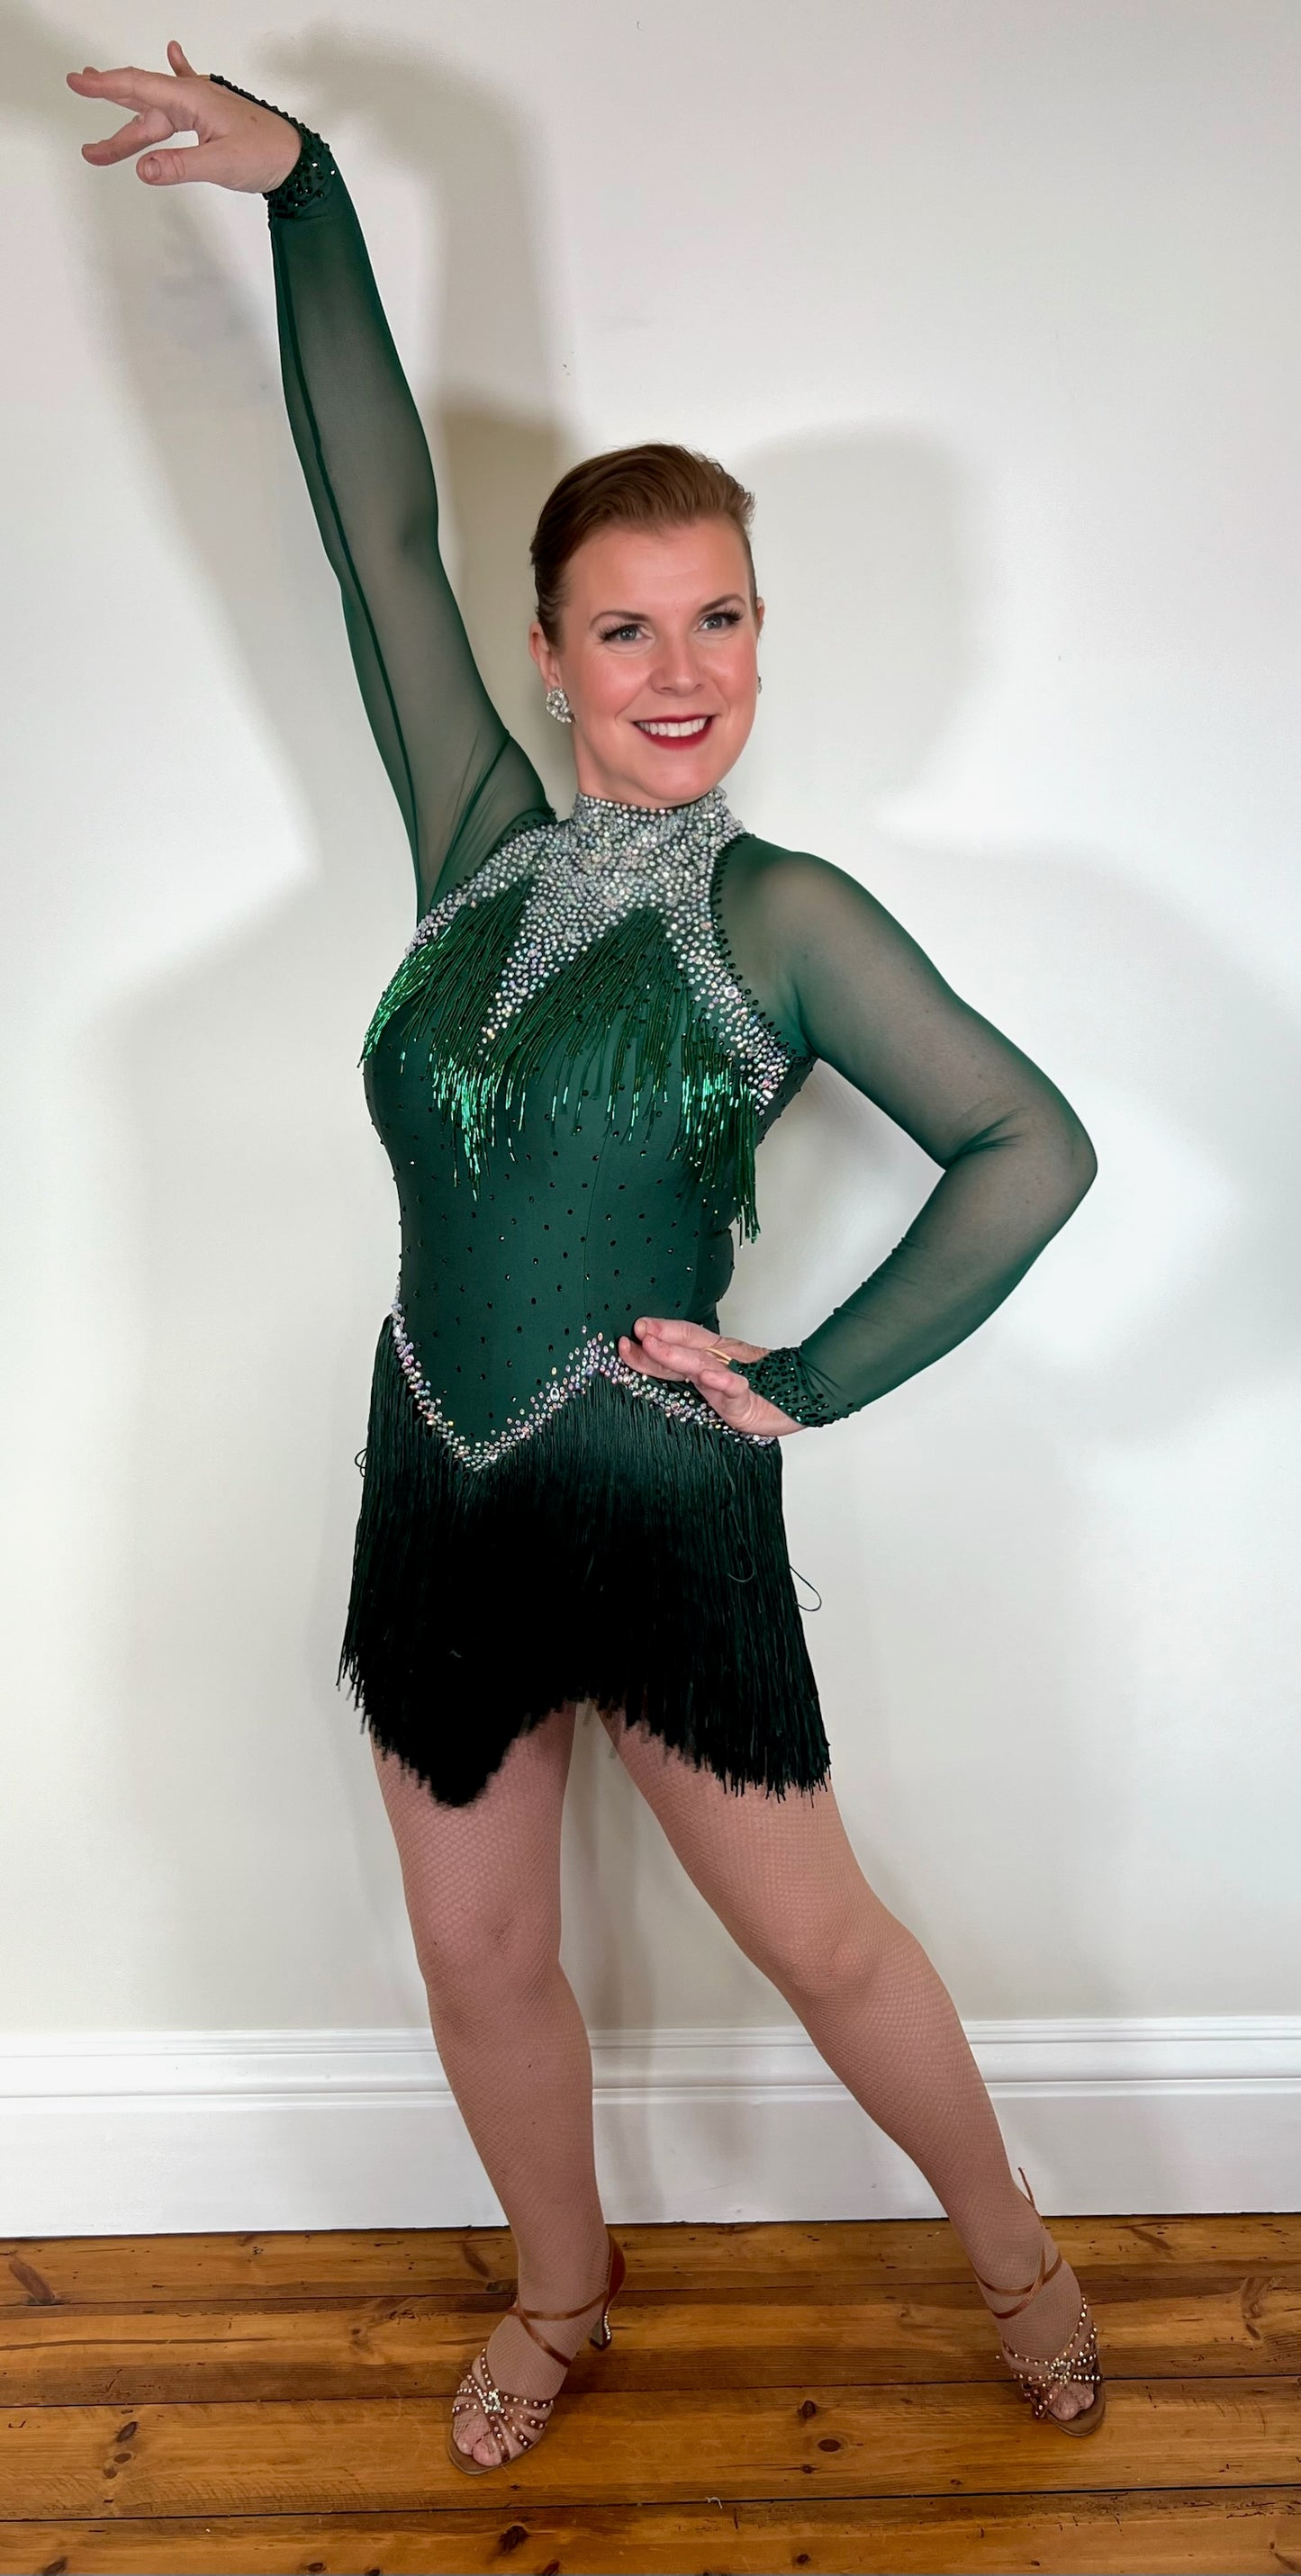 051 Forest Green Competition Latin Dance Dress. Bead droppers to the upper chest are with high neck and stoned chest detail. Heavy fringing to the skirt. Long sleeved and filled in mesh back. Stoned in emerald green & AB